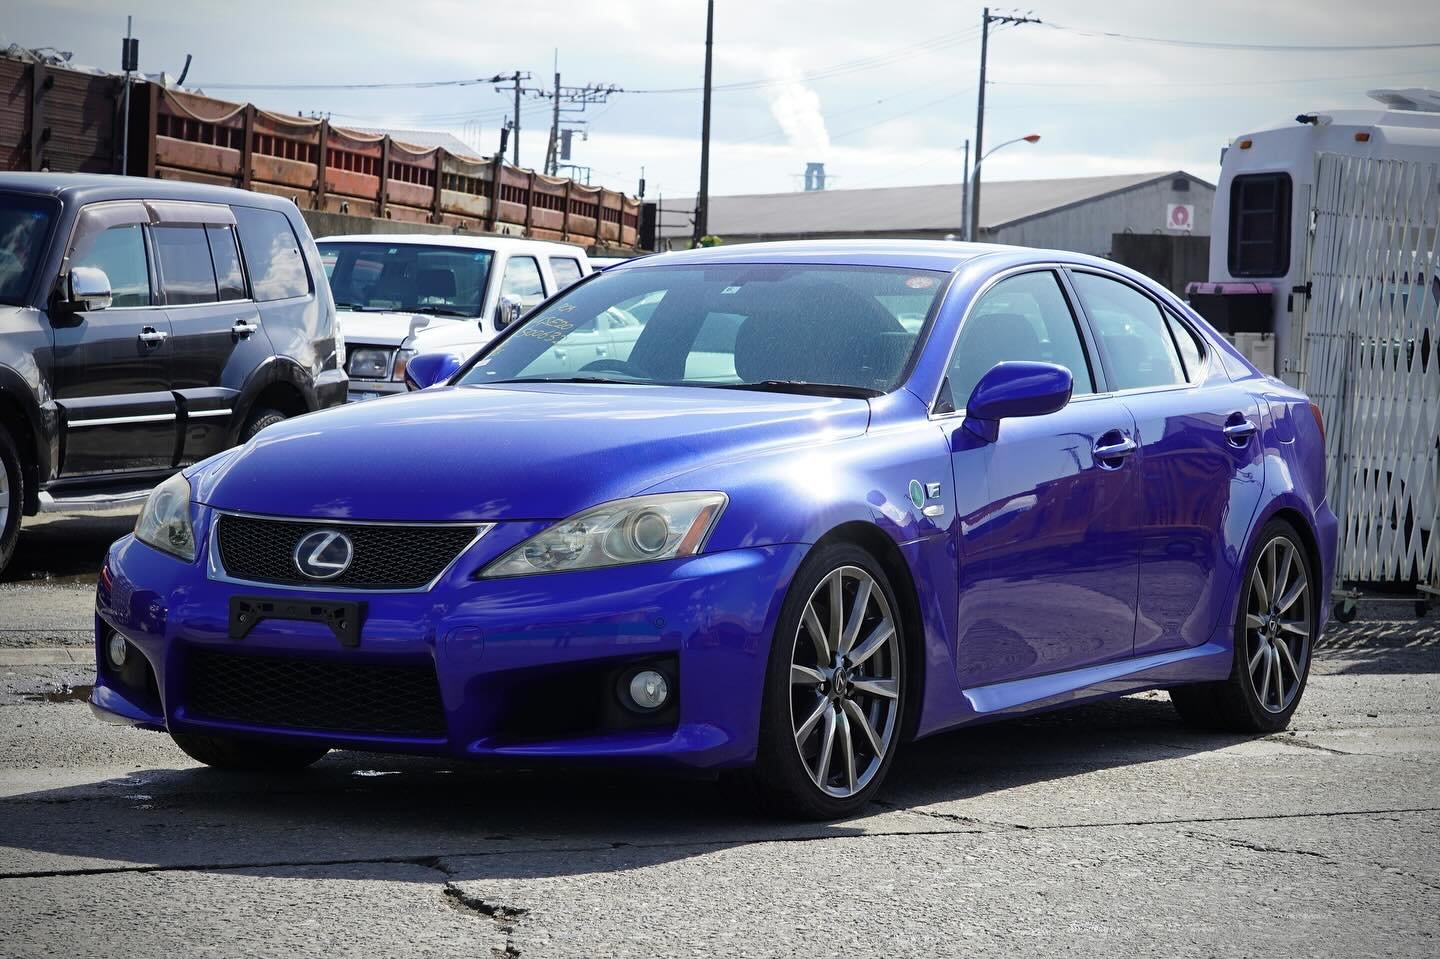 2009 Lexus IS-F bought direct from dealer auction in Japan for a Calgary area client. Super tidy with only 55,000km on the clock. 

Zen is always proud to represent these extra clean examples! 

______________________
FOR MORE INFORMATION
Call 403-61